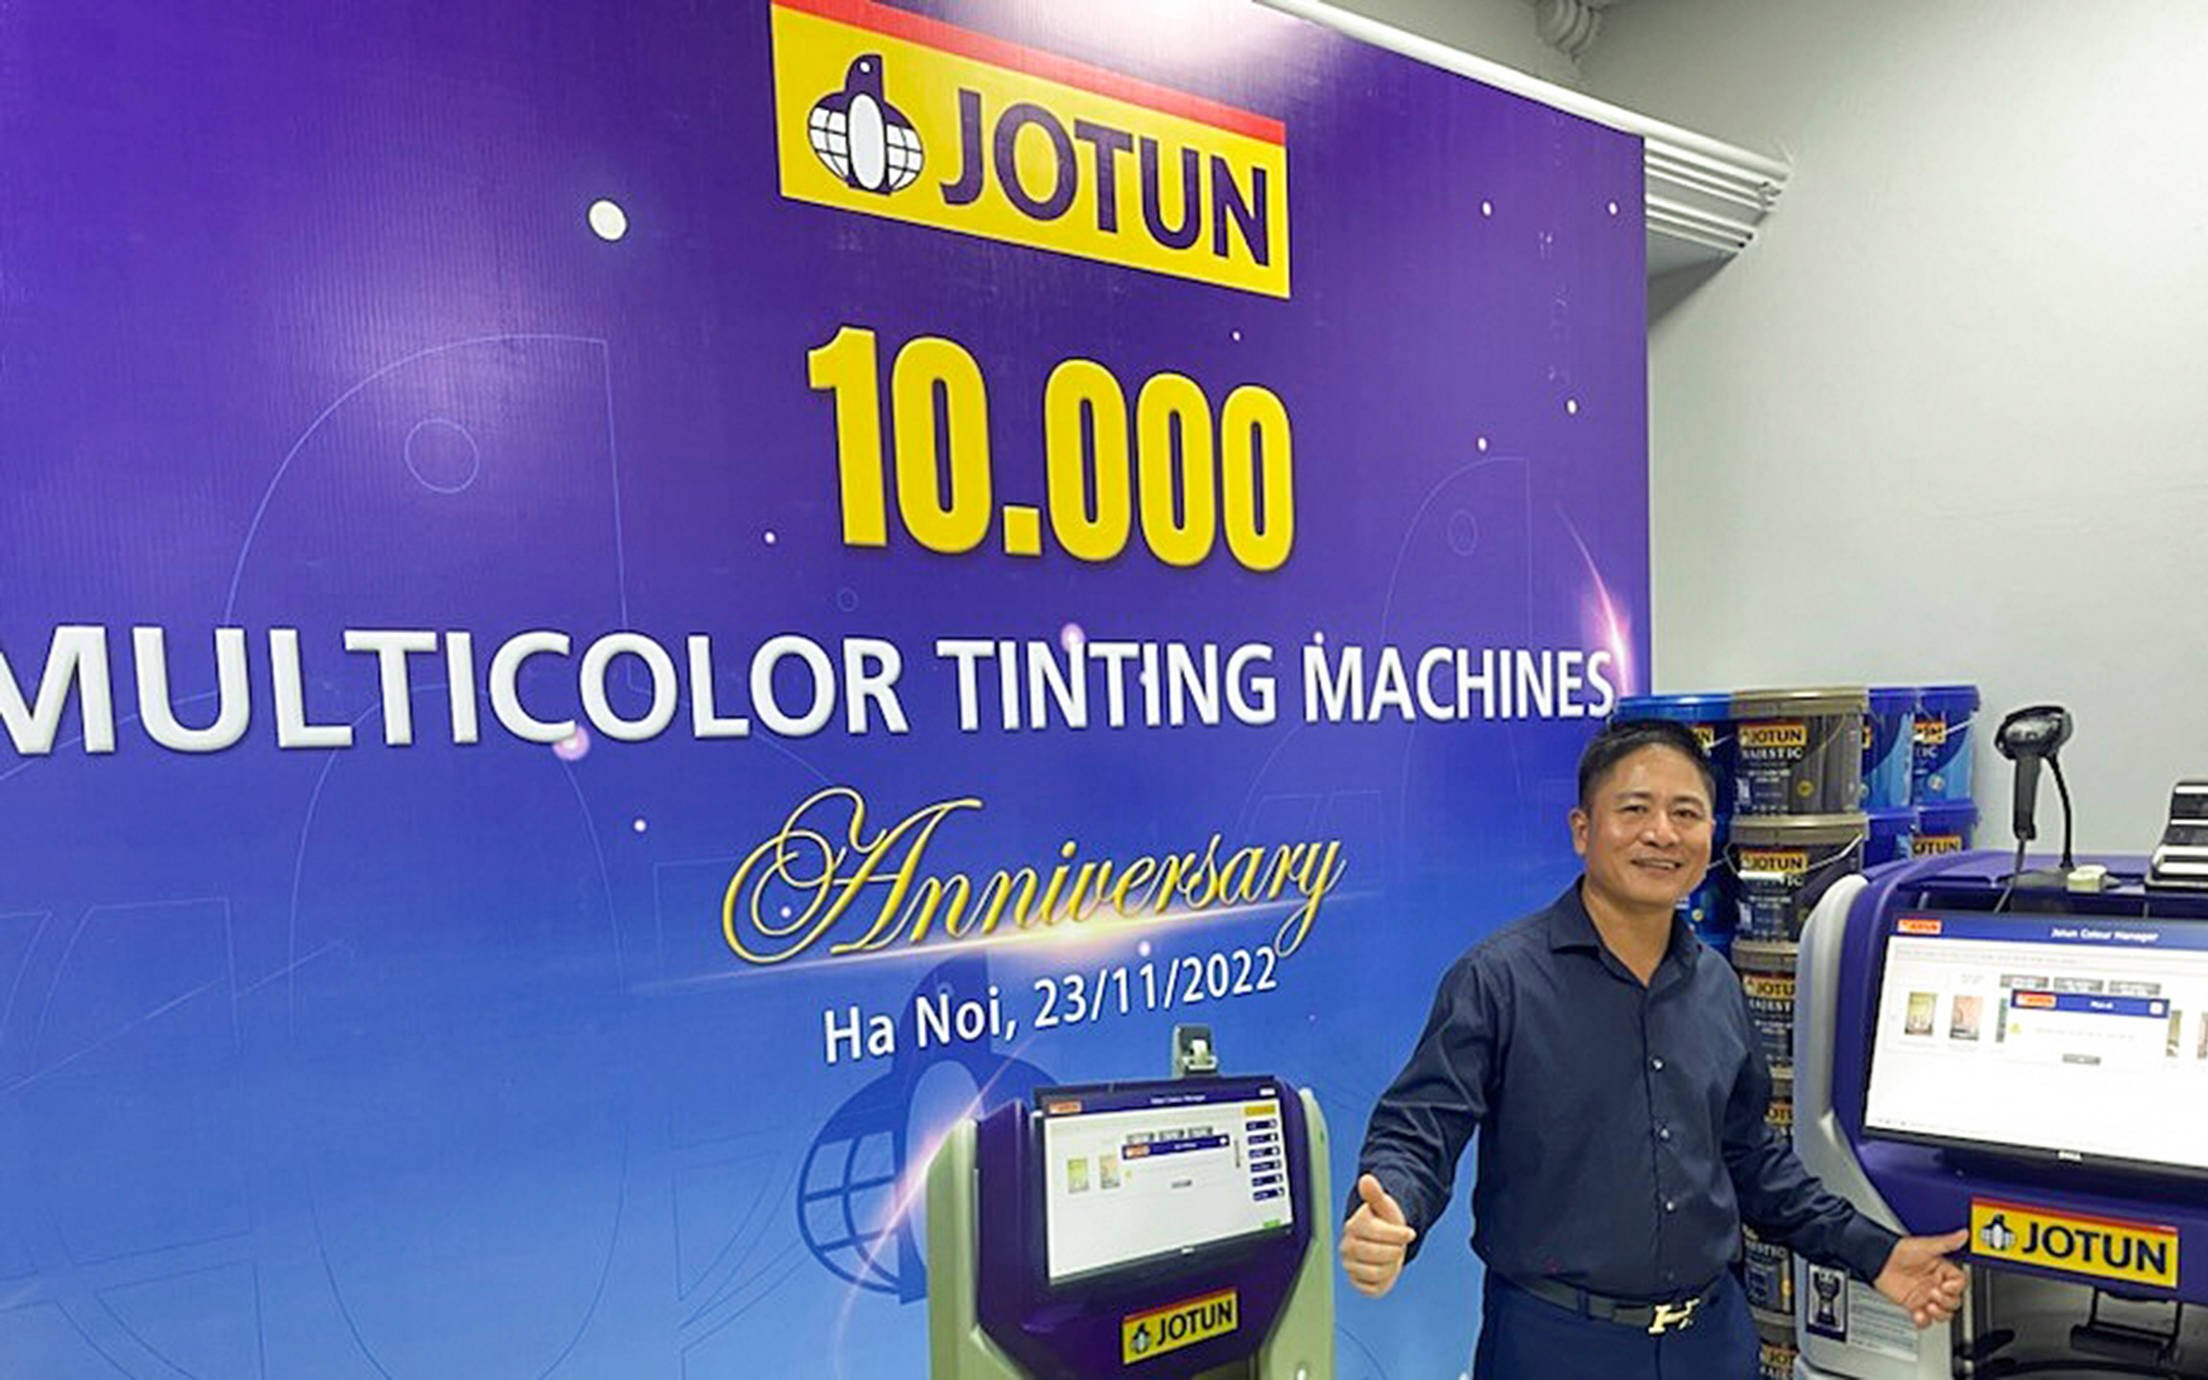 Long time dealer, Binh Nguyen, celebrates the installation of Jotun’s 10,000th Multicolor Machine.